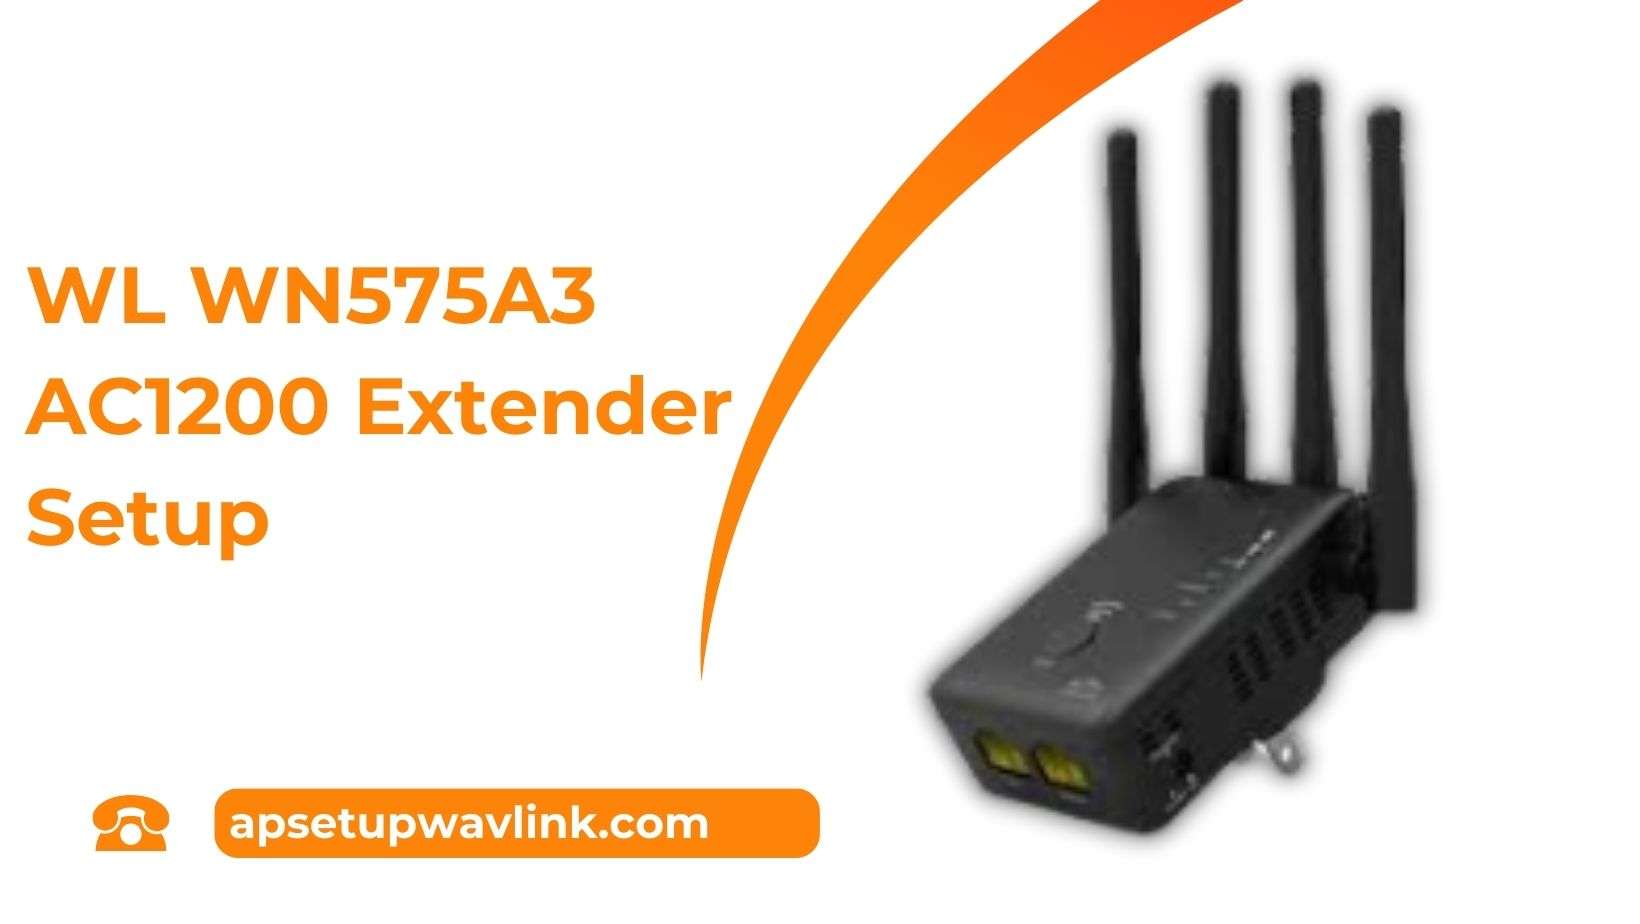 You are currently viewing WL WN575A3 AC1200 Extender Setup